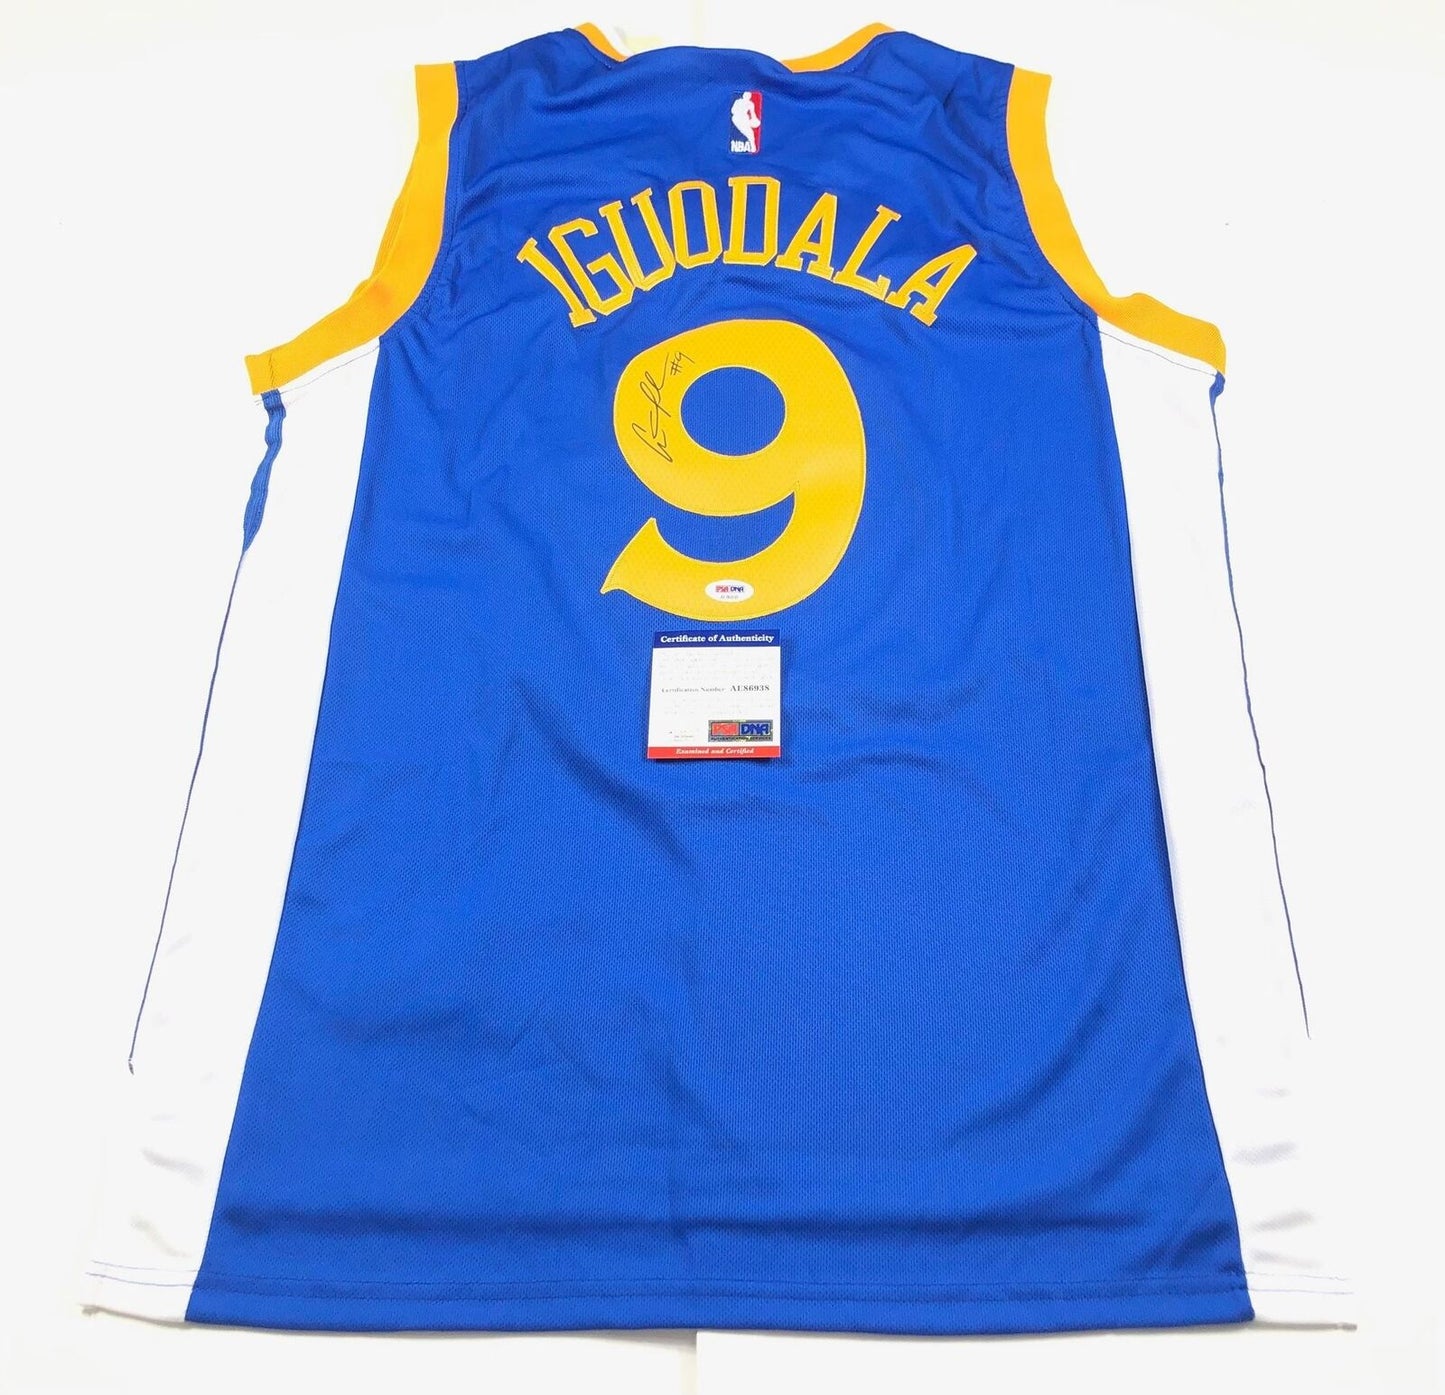 Andre Iguodala signed jersey PSA/DNA Golden State Warriors Autographed